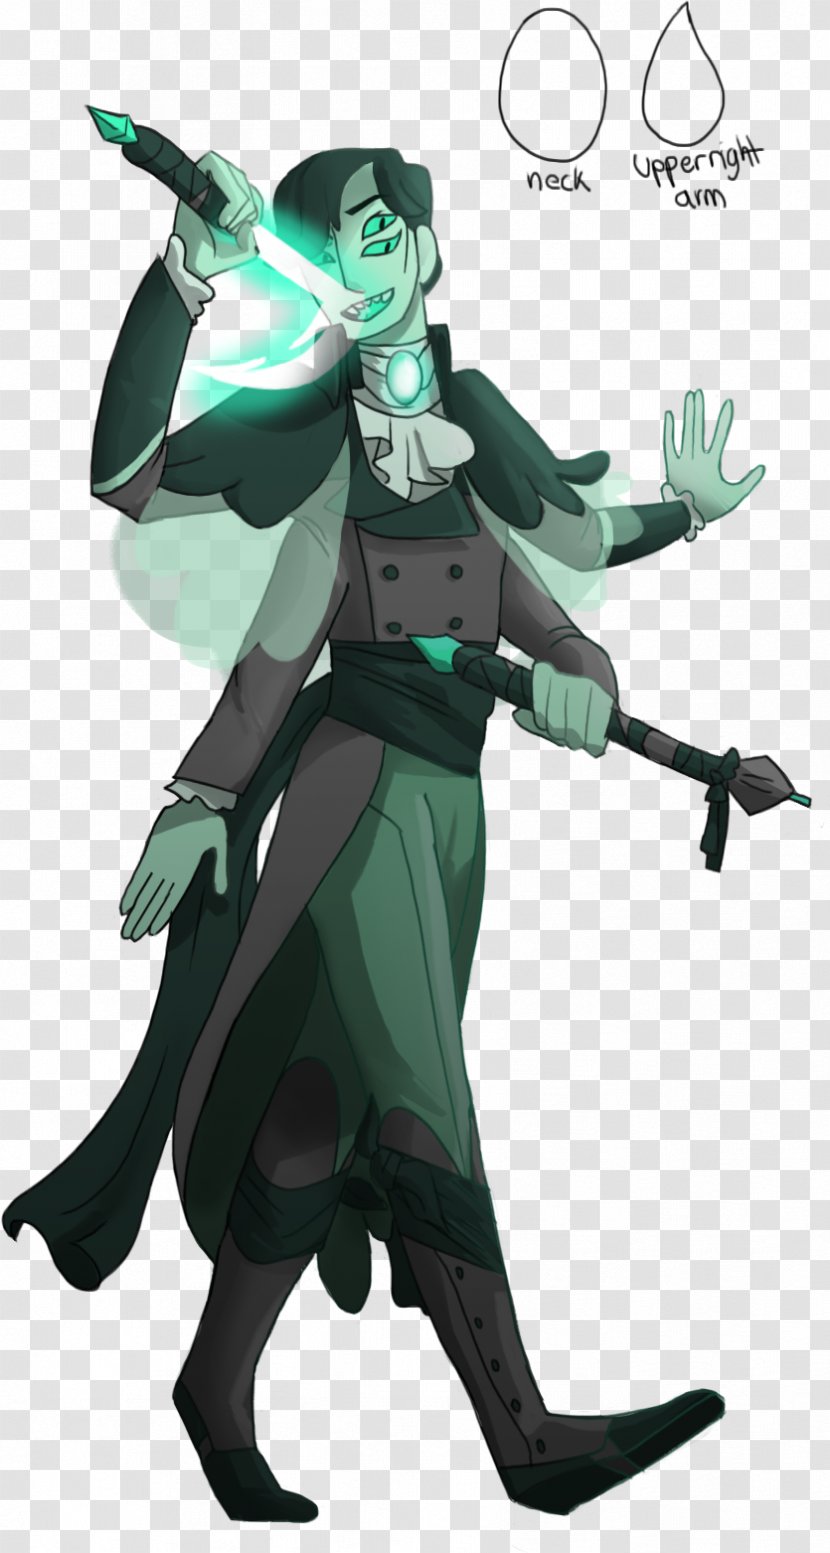 Costume Design Action & Toy Figures Supervillain Animated Cartoon - Fictional Character - Chrysocolla Transparent PNG